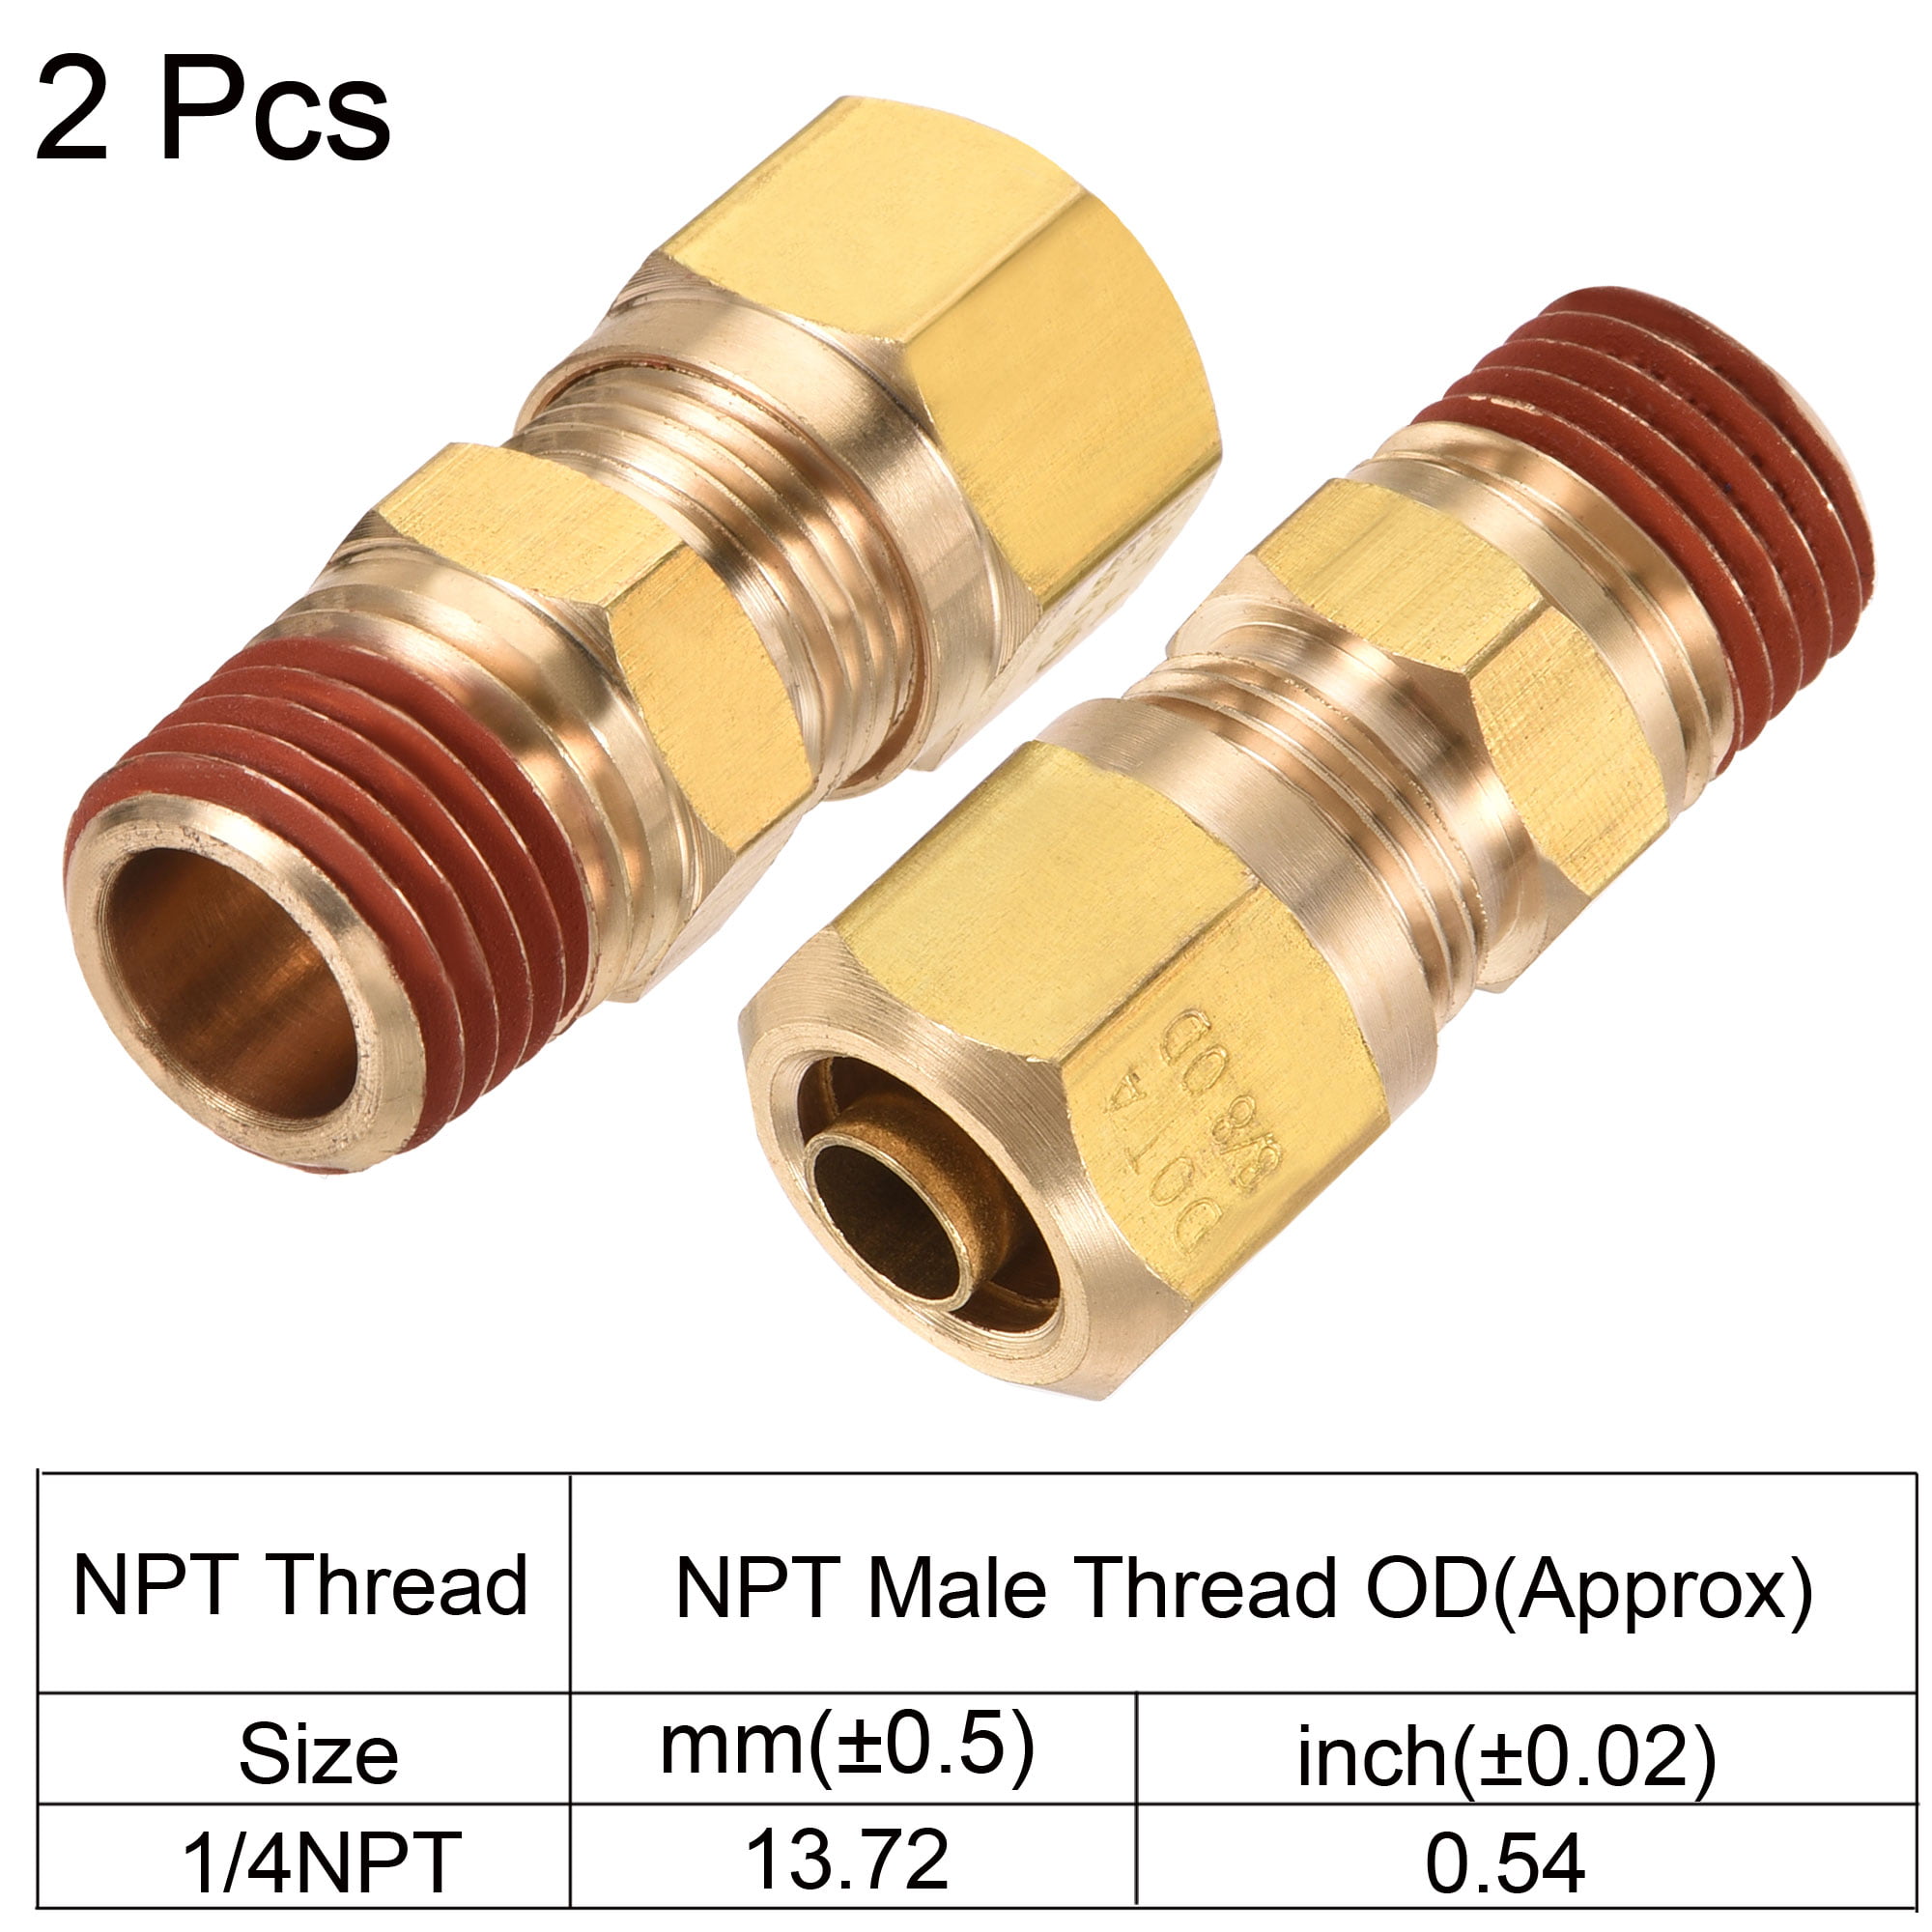 STRAIGHT COMPRESSION Plumbing Fittings Brass MM ELBOW TEE STOP END COUPLING 